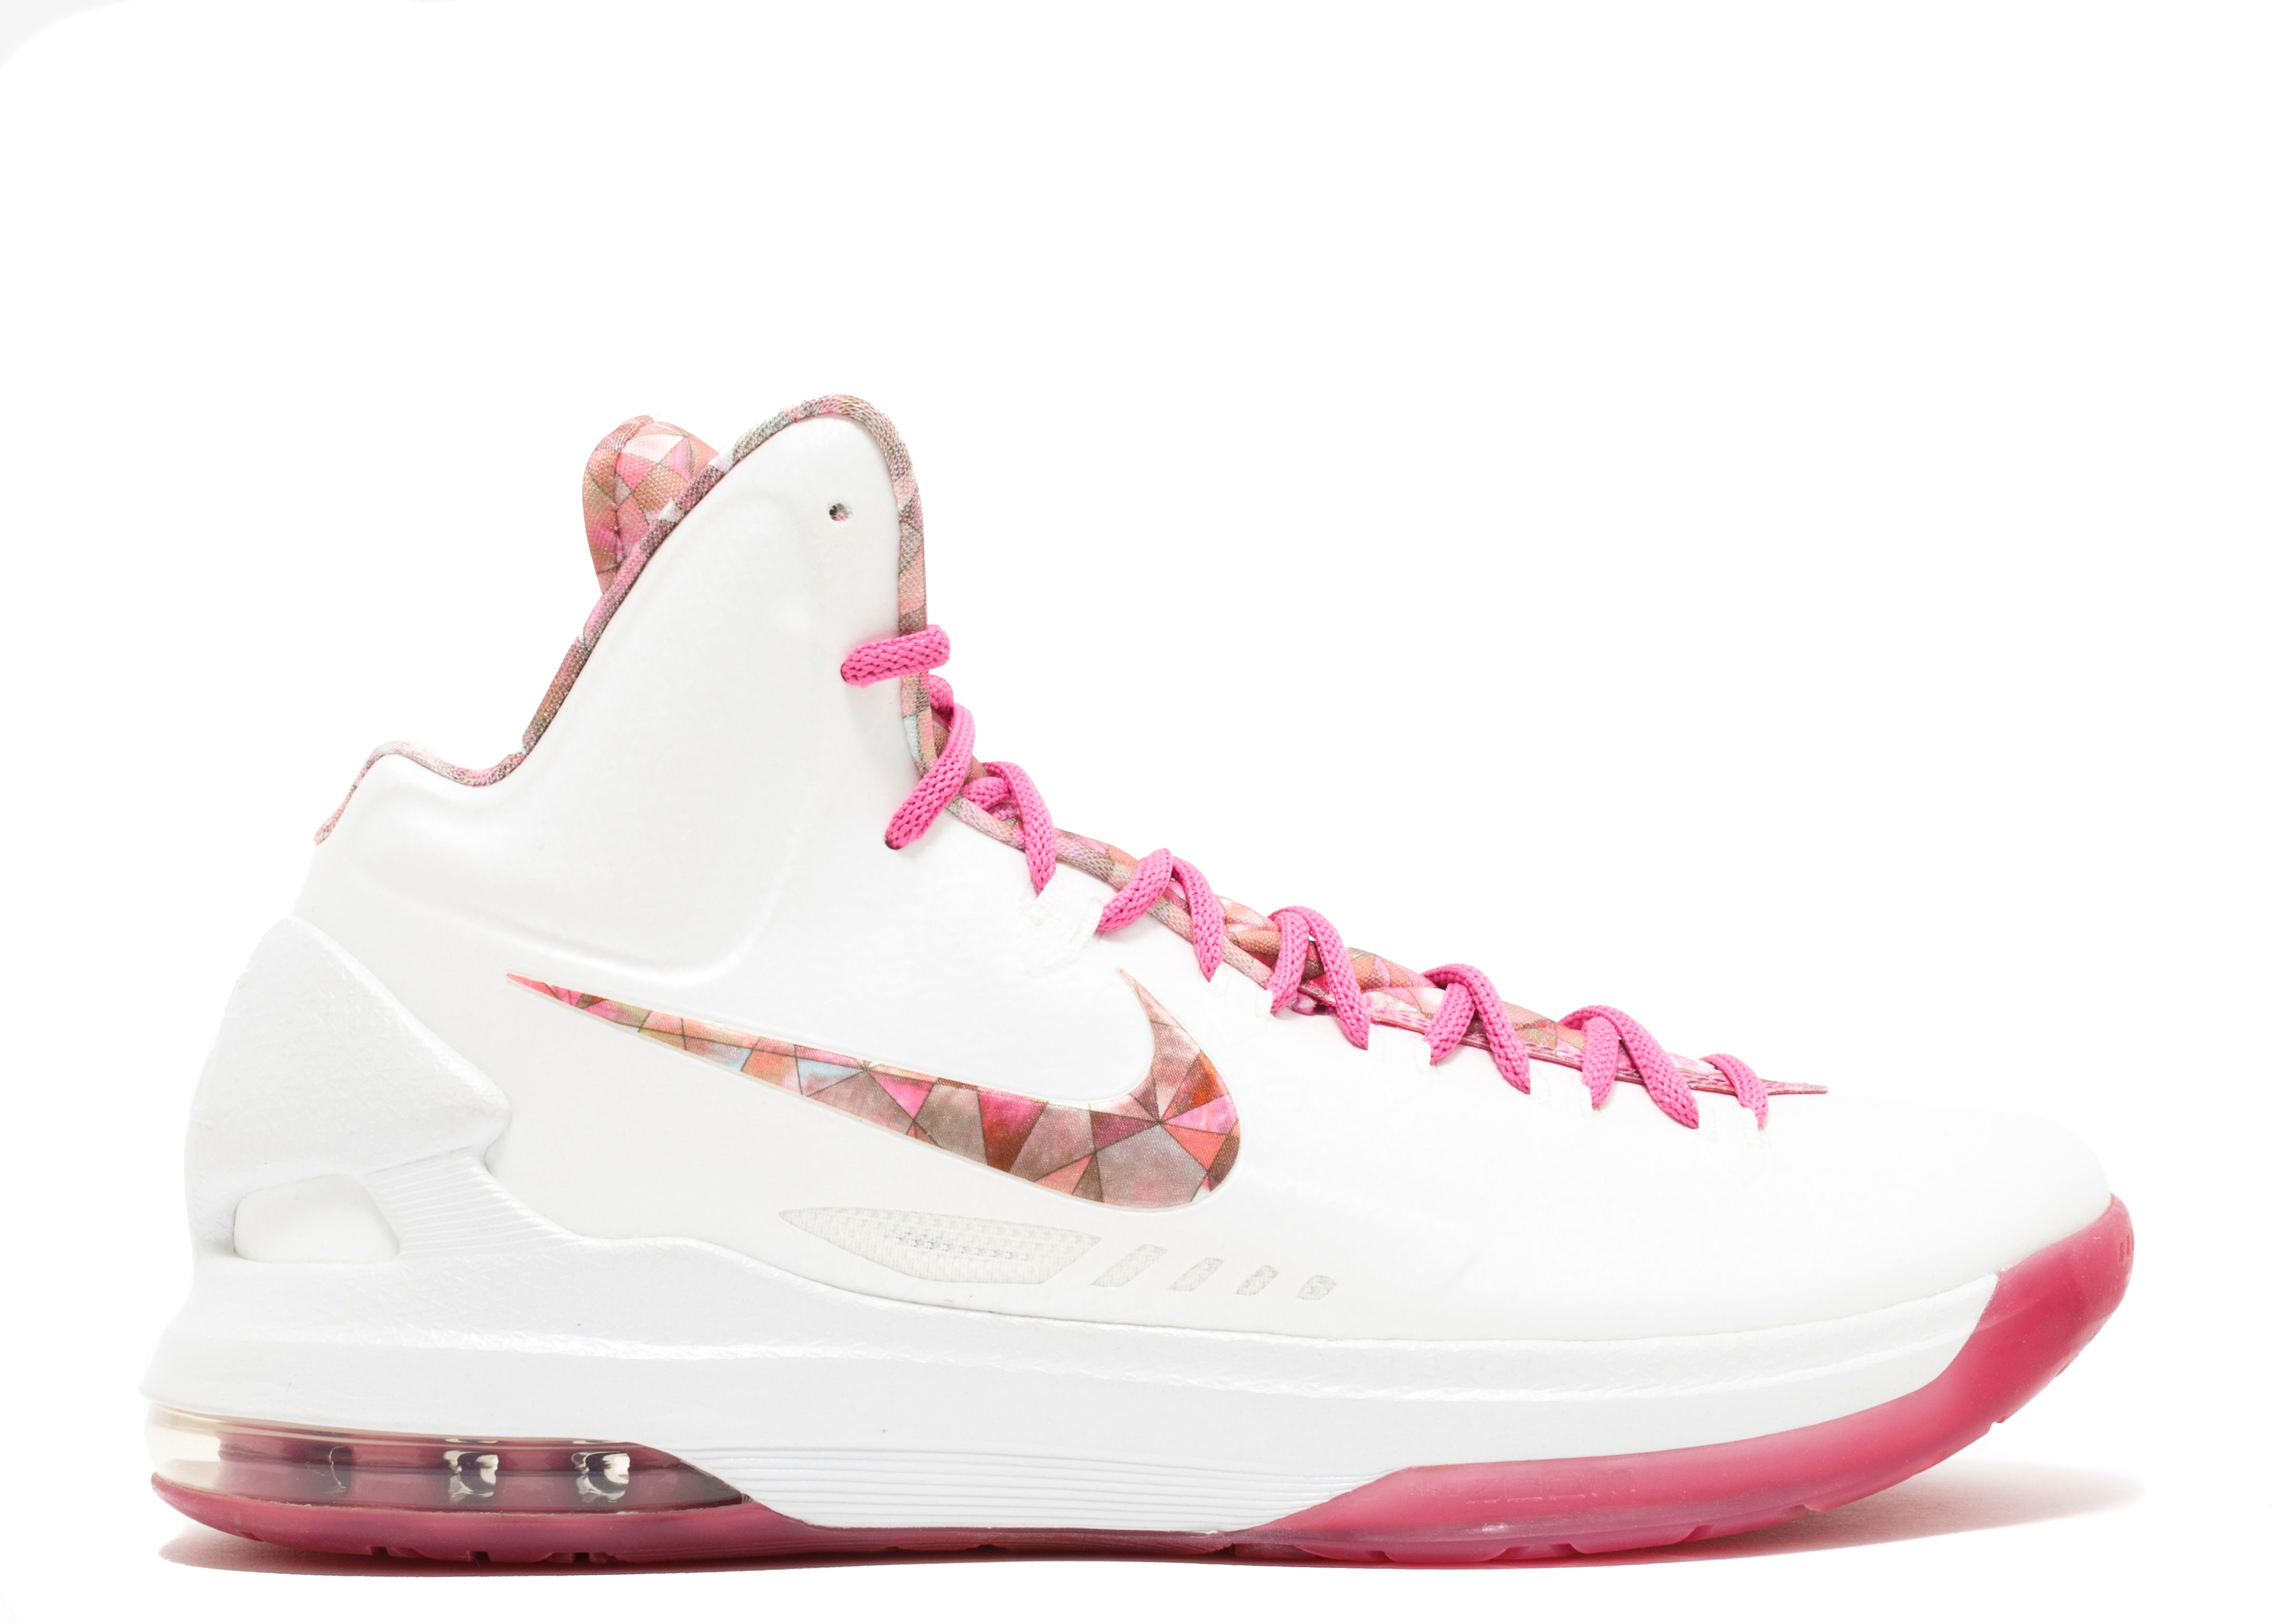 kd 3 aunt pearl